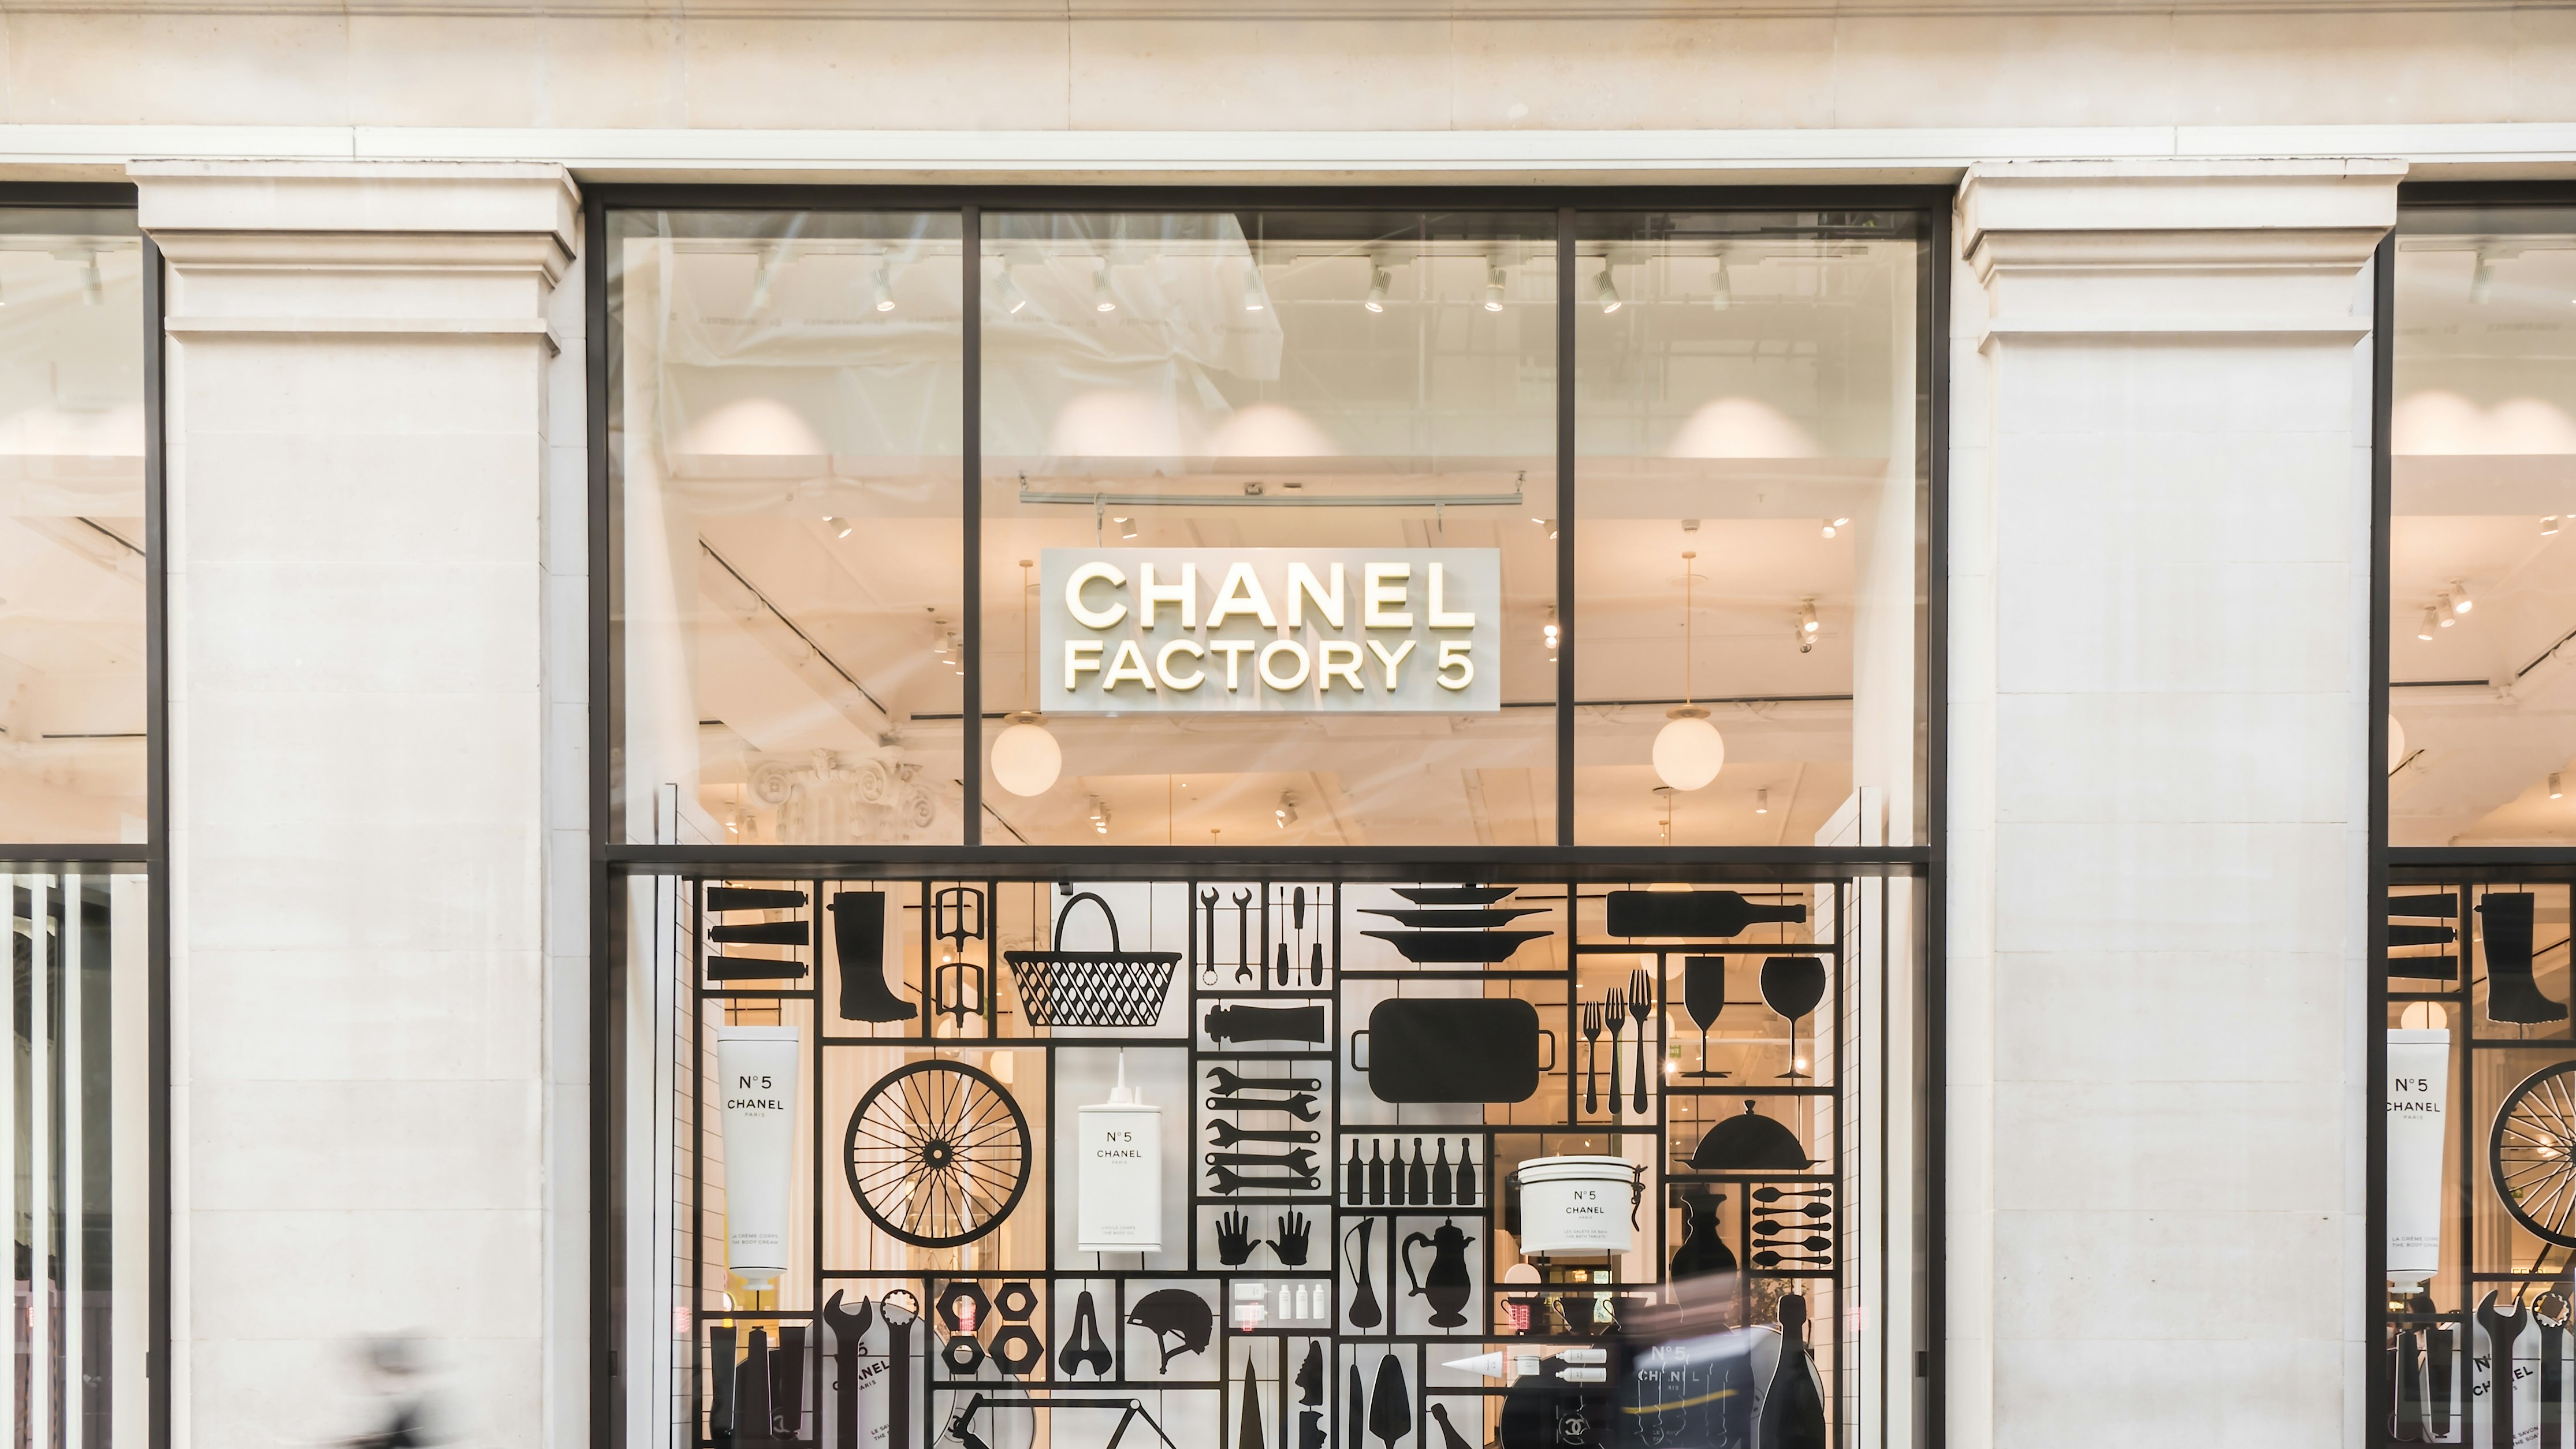 There's A Chanel Factory 5 Mystery Box And Here's How You Can